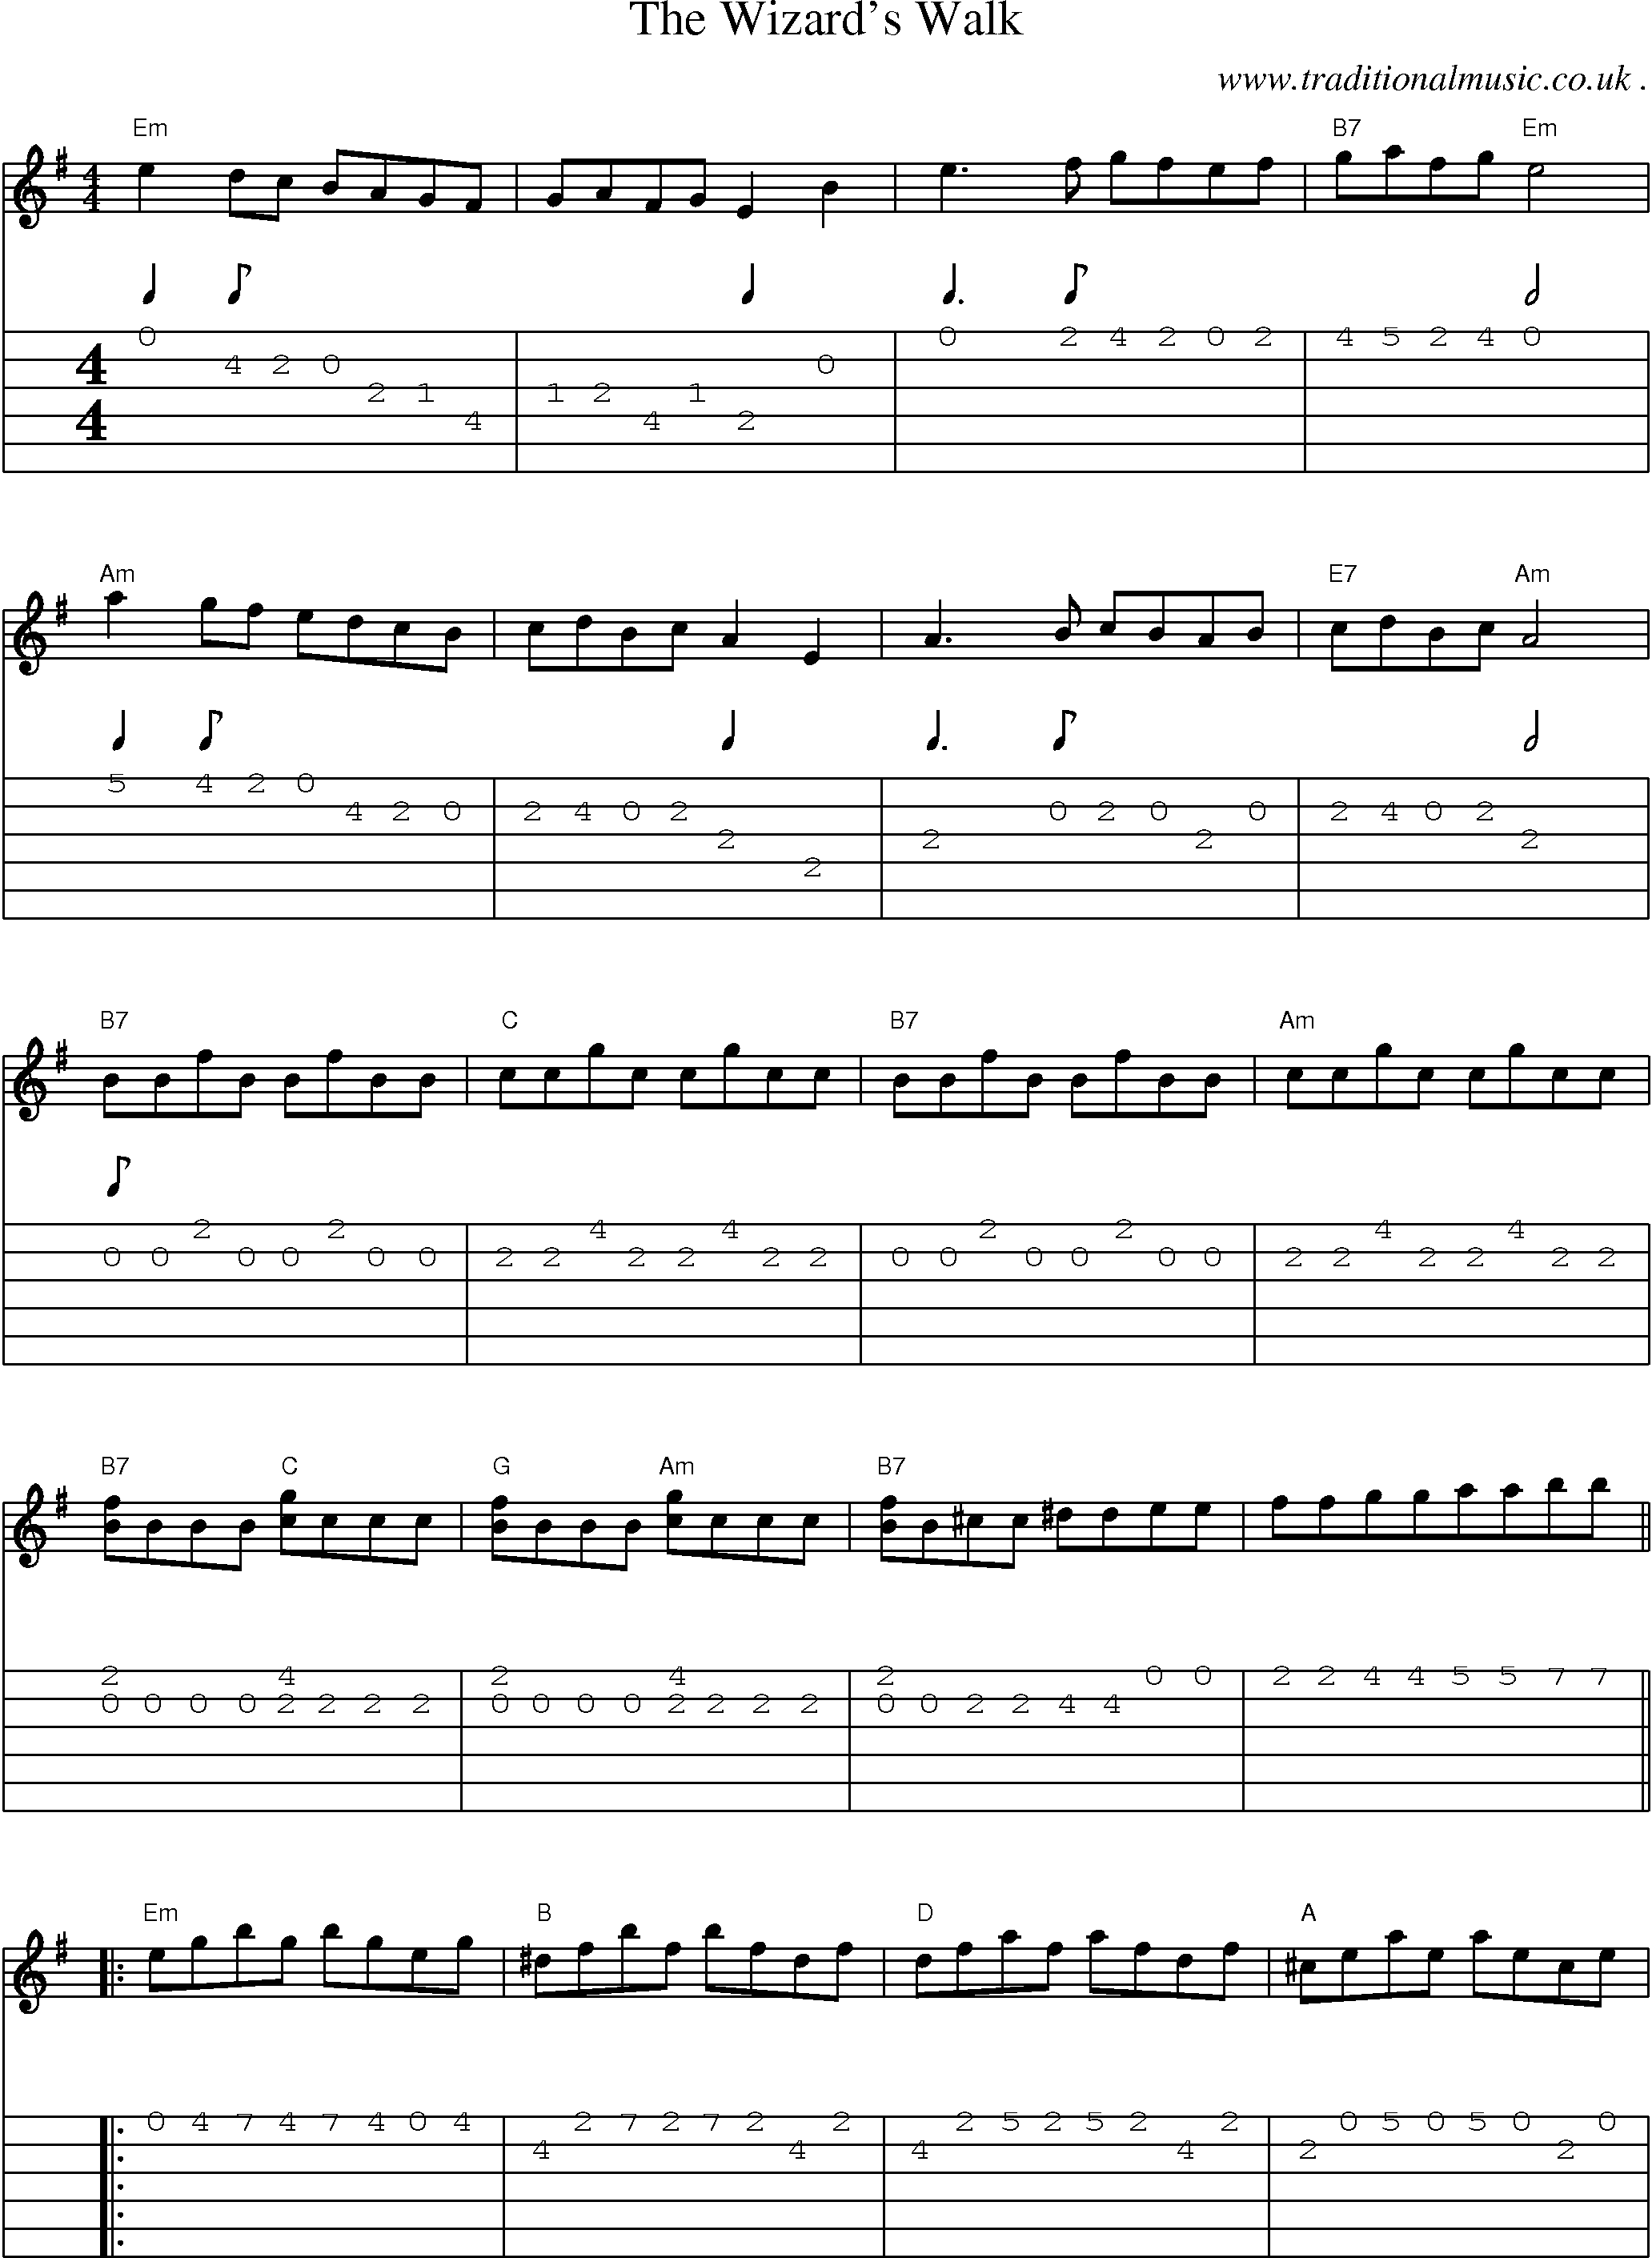 Music Score and Guitar Tabs for The Wizards Walk